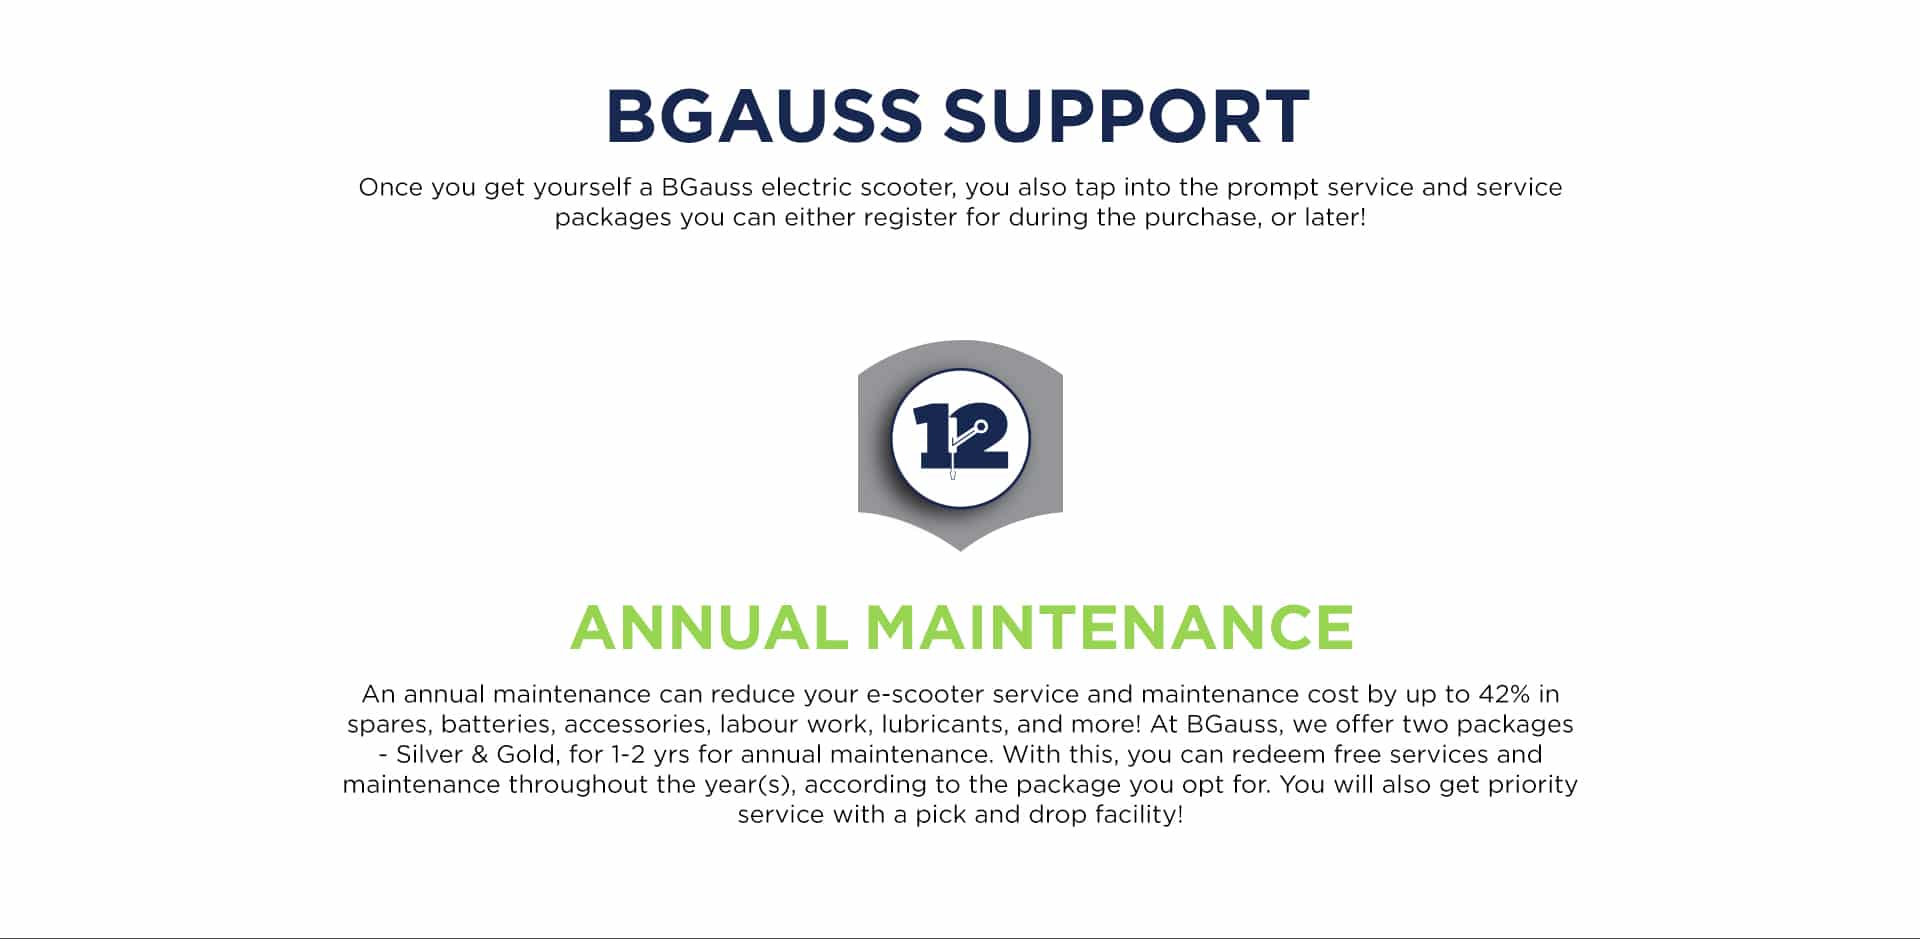 BGauss electric scooter App Support